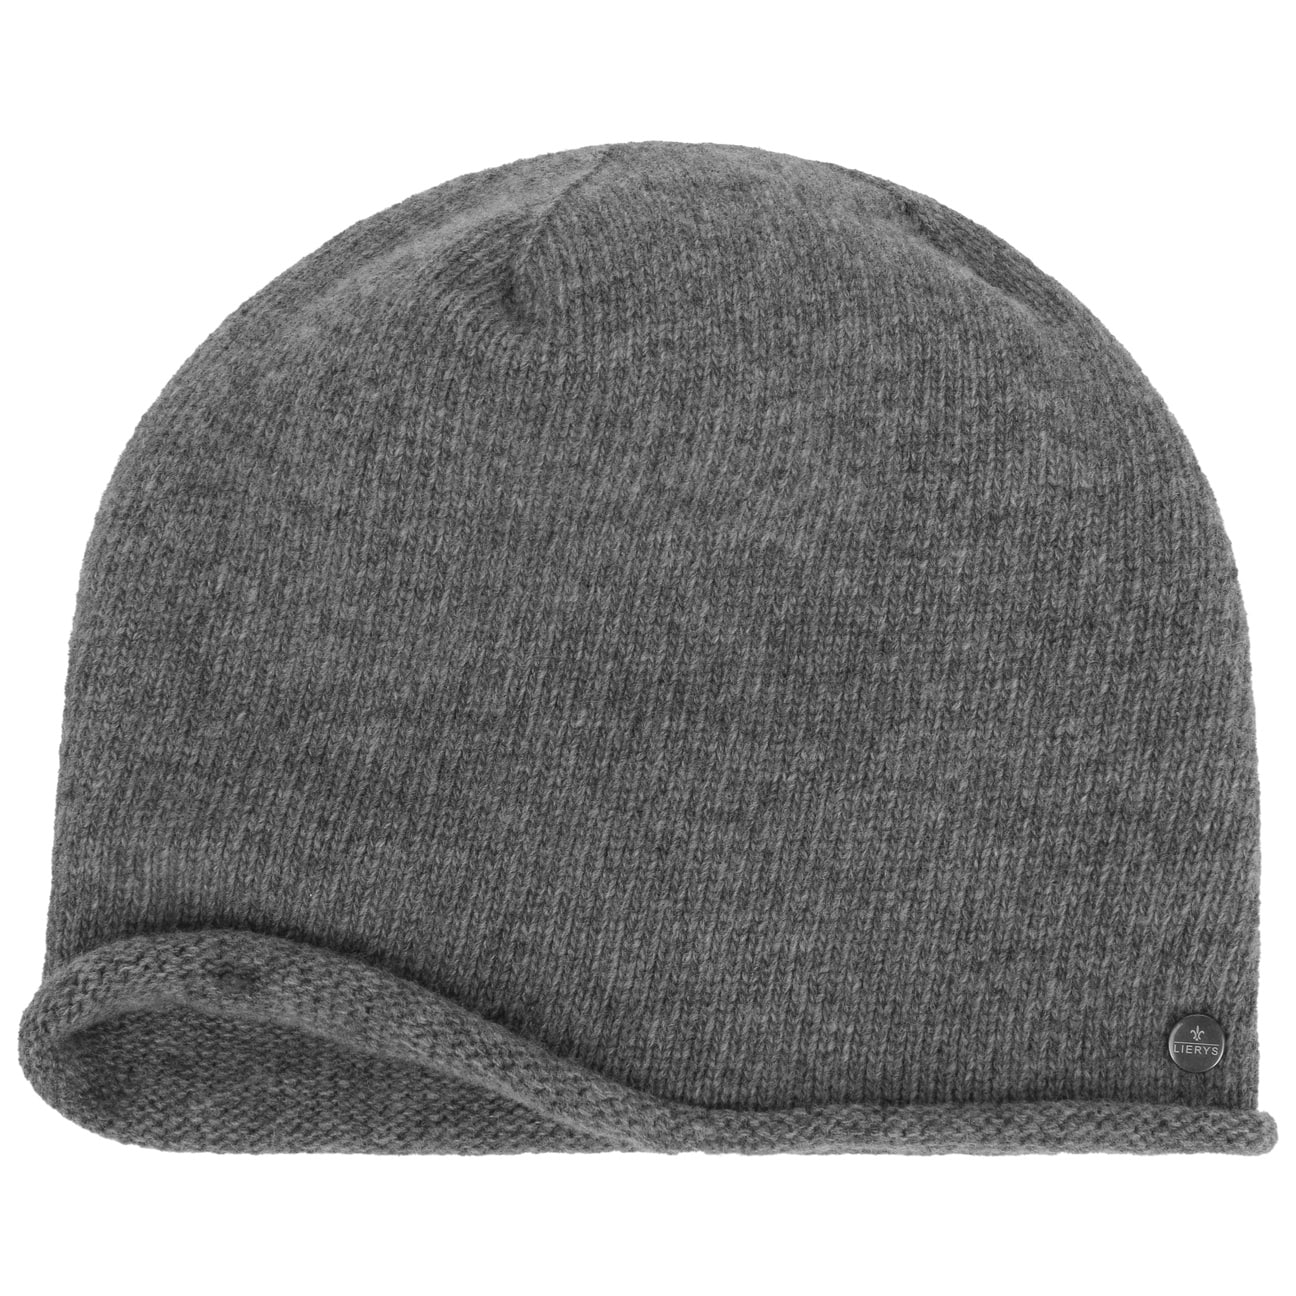 Hat Box by Lierys -->   High-quality Lierys hats, beanies & caps